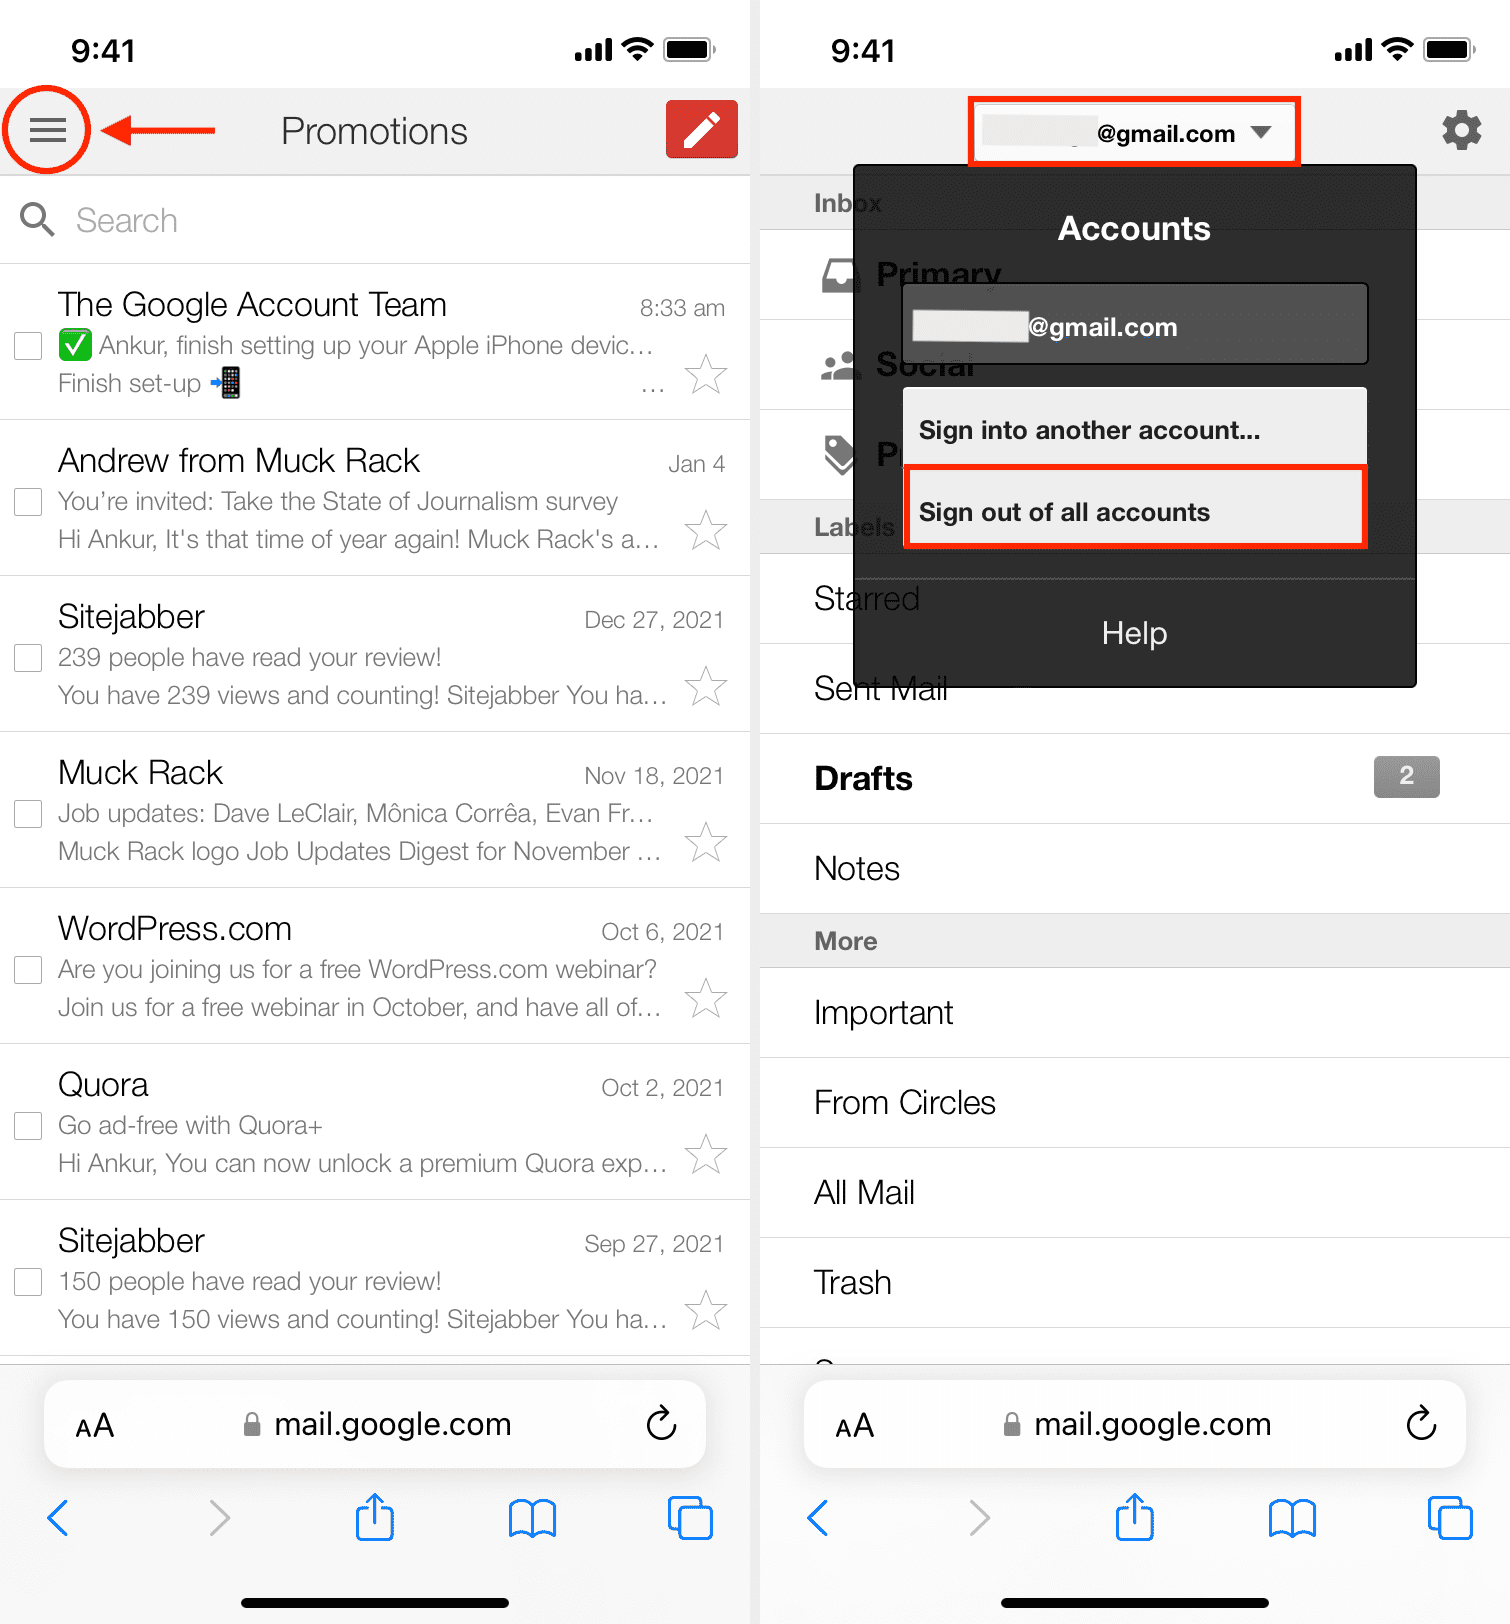 Sign out of all accounts for Gmail in mobile browser